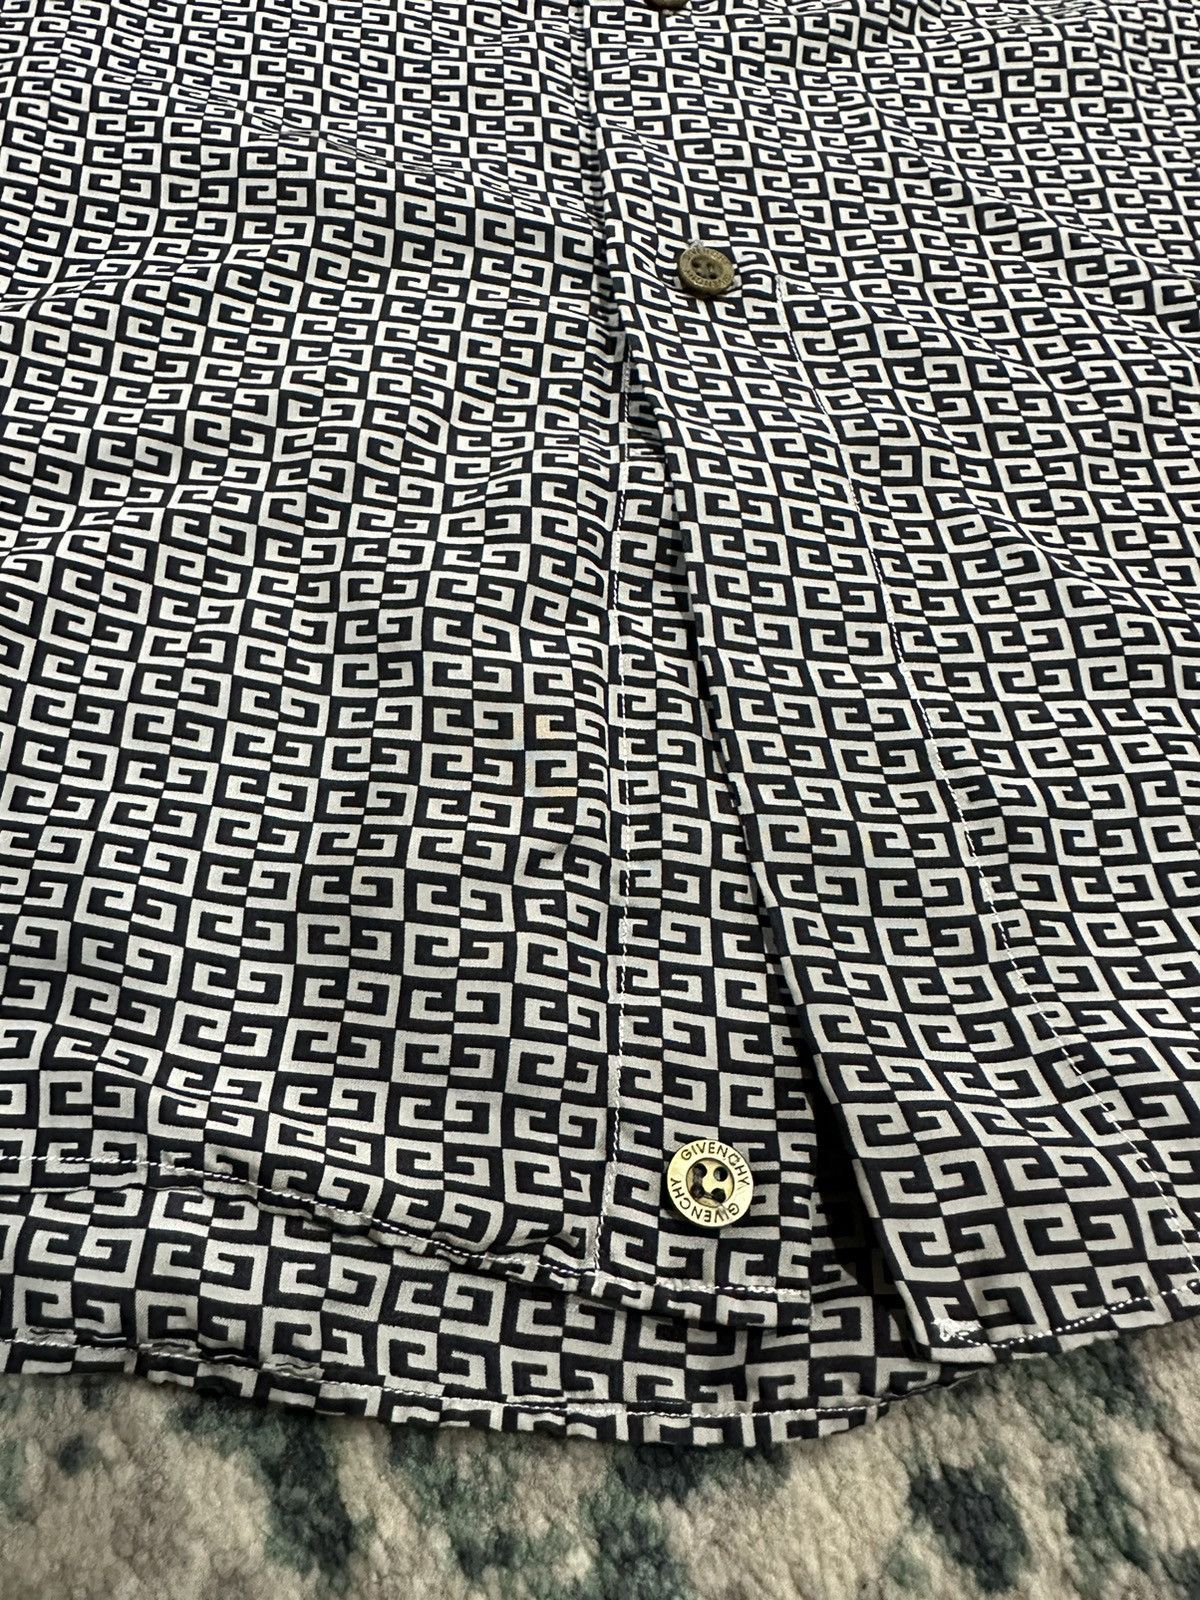 Givenchy Made in Italy Monogram Silk Button Shirt - 22